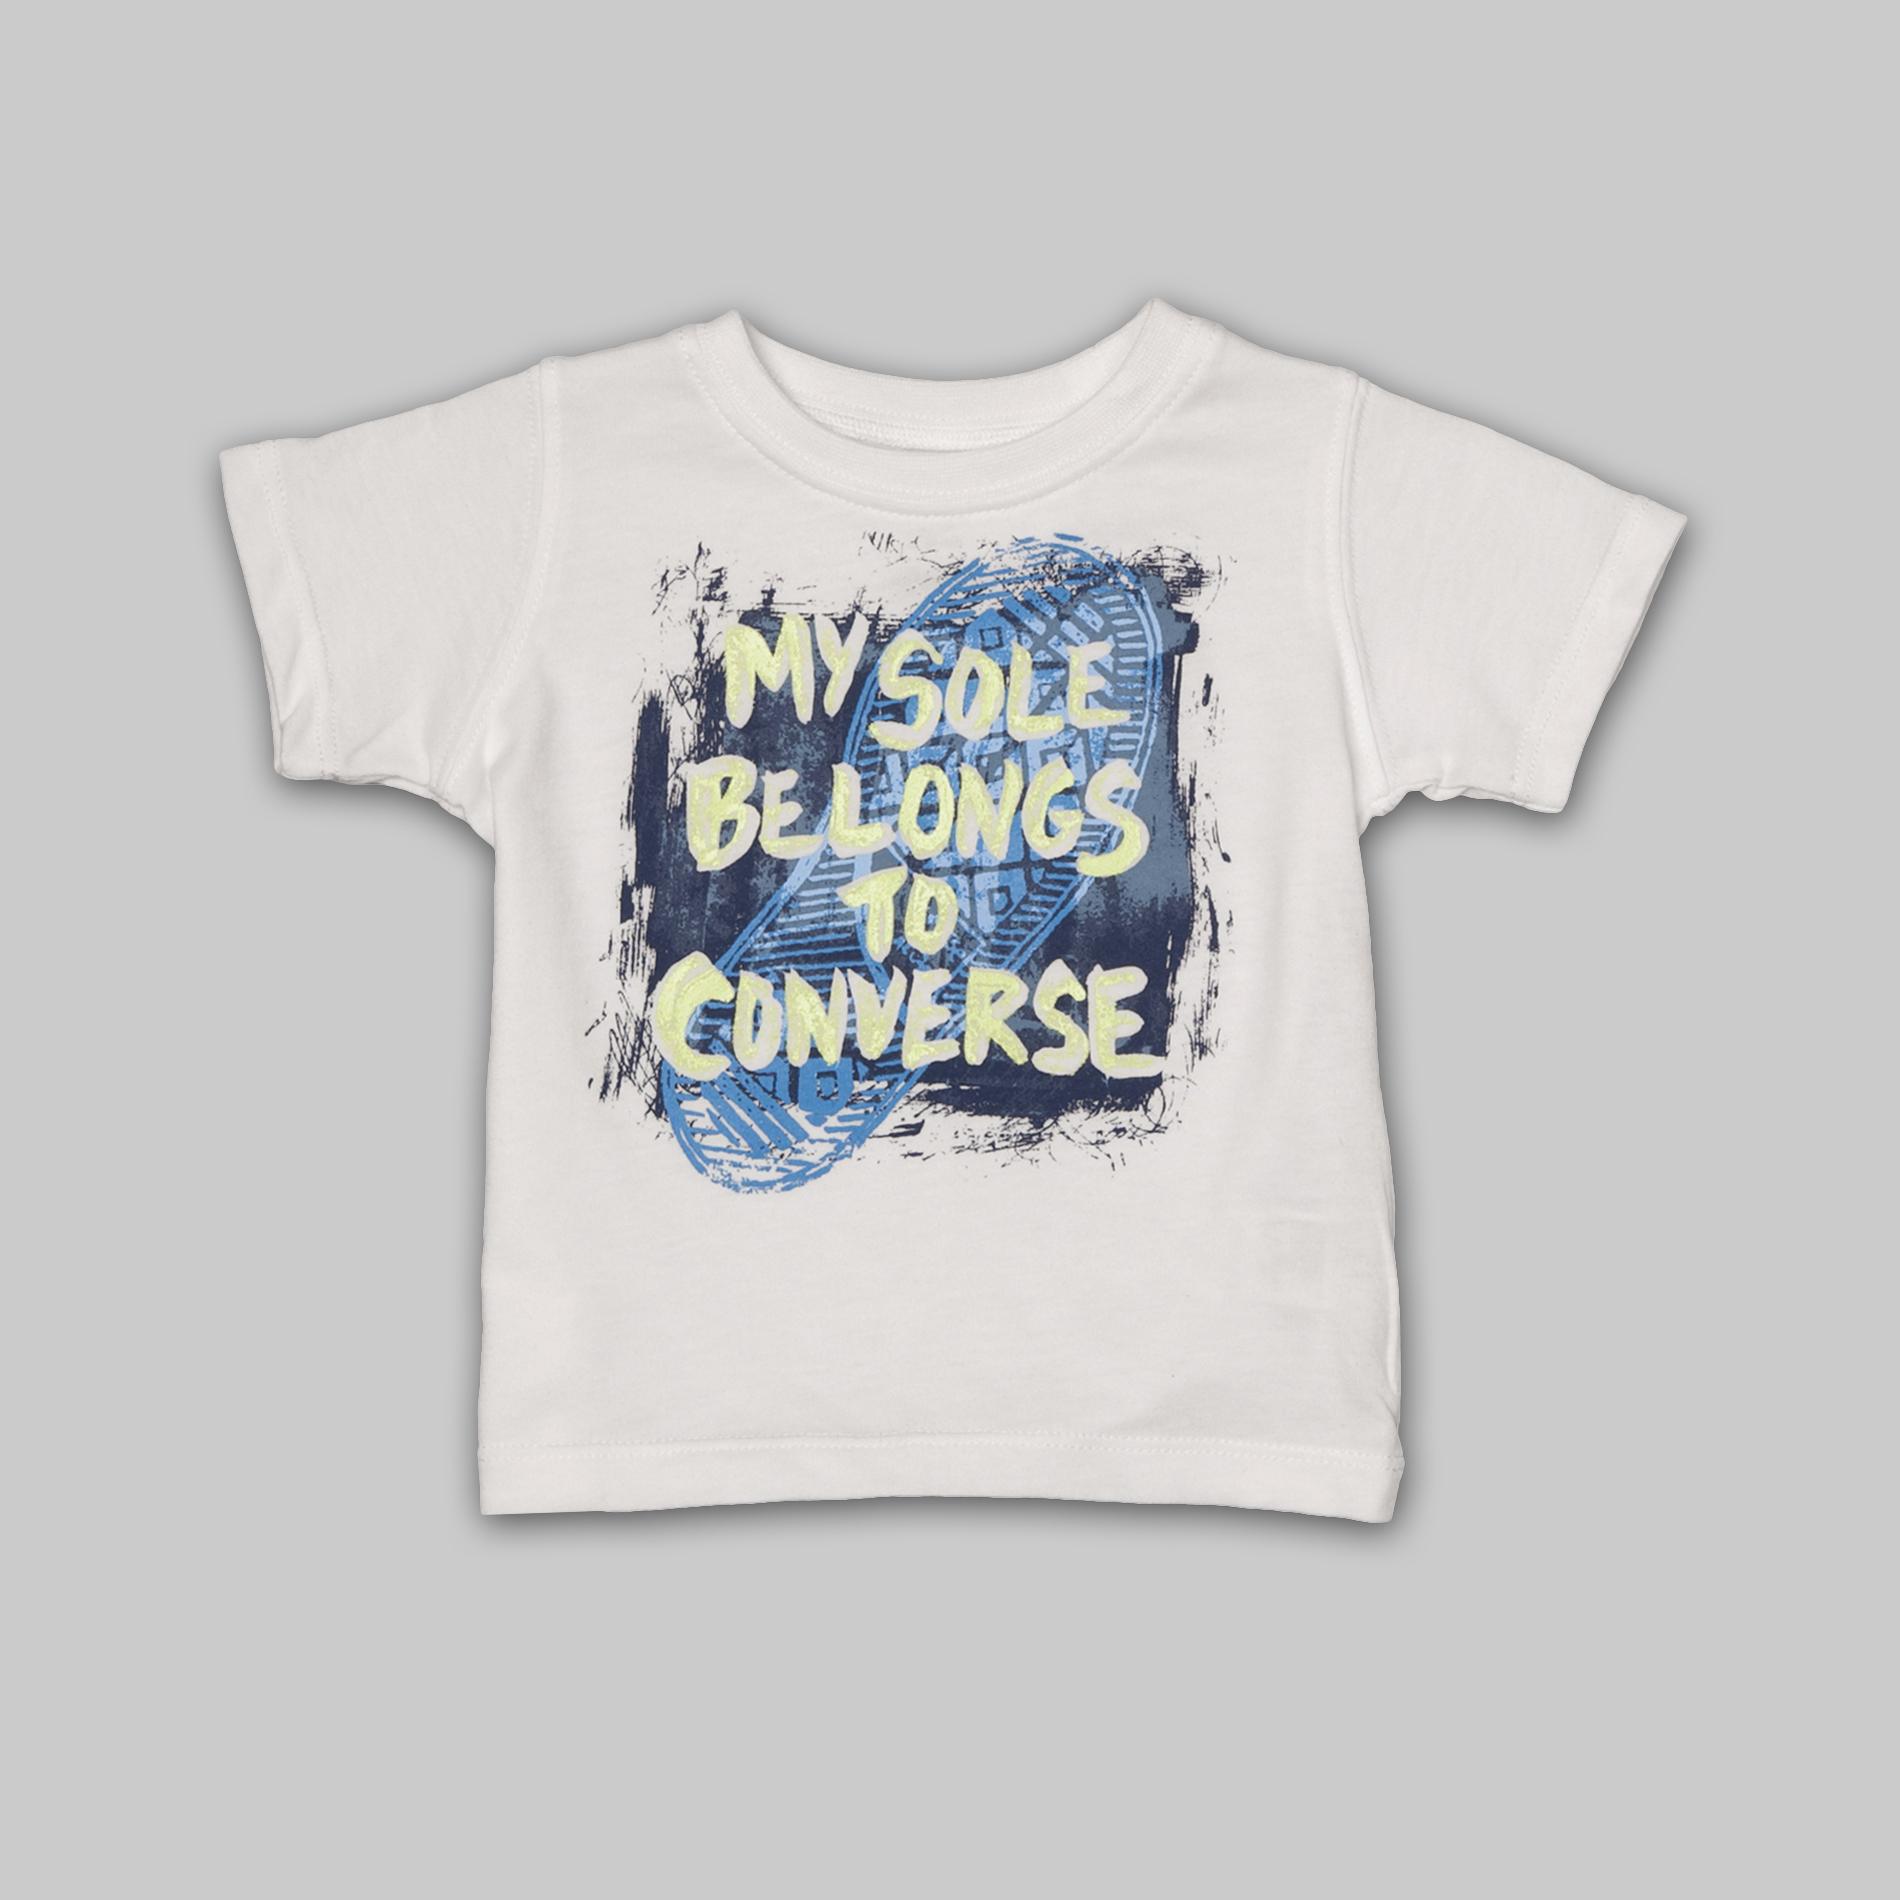 Converse Infant & Toddler Boy's Graphic T-Shirt - My Sole